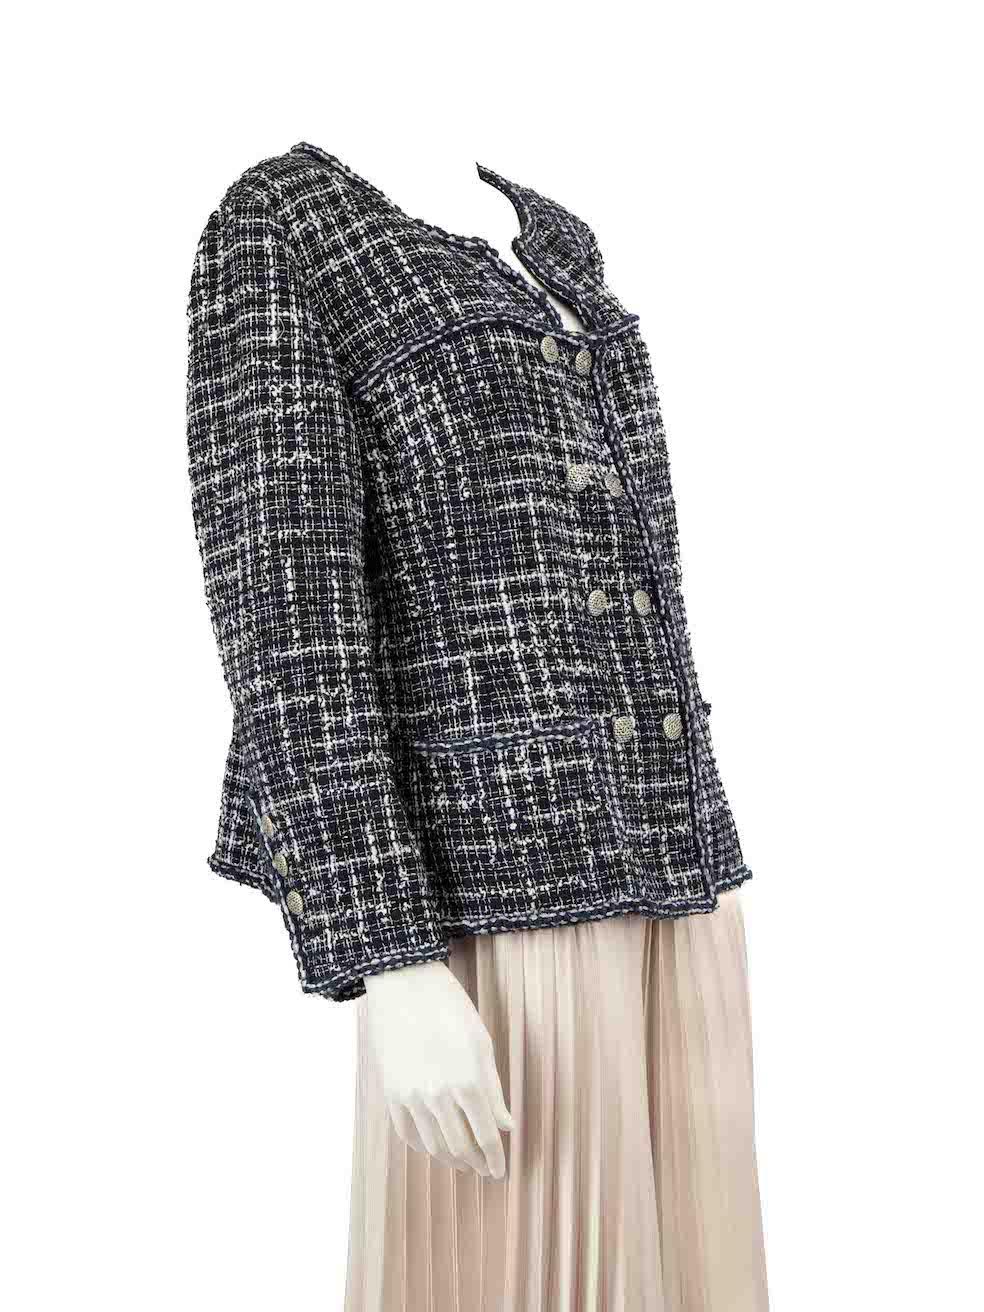 CONDITION is Very good. Hardly any visible wear to jacket is evident on this used Chanel designer resale item.
 
 
 
 Details
 
 
 2014
 
 Navy
 
 Tweed
 
 Fitted jacket
 
 Tartan pattern
 
 Double breasted
 
 CC logo weave buttons
 
 Buttoned